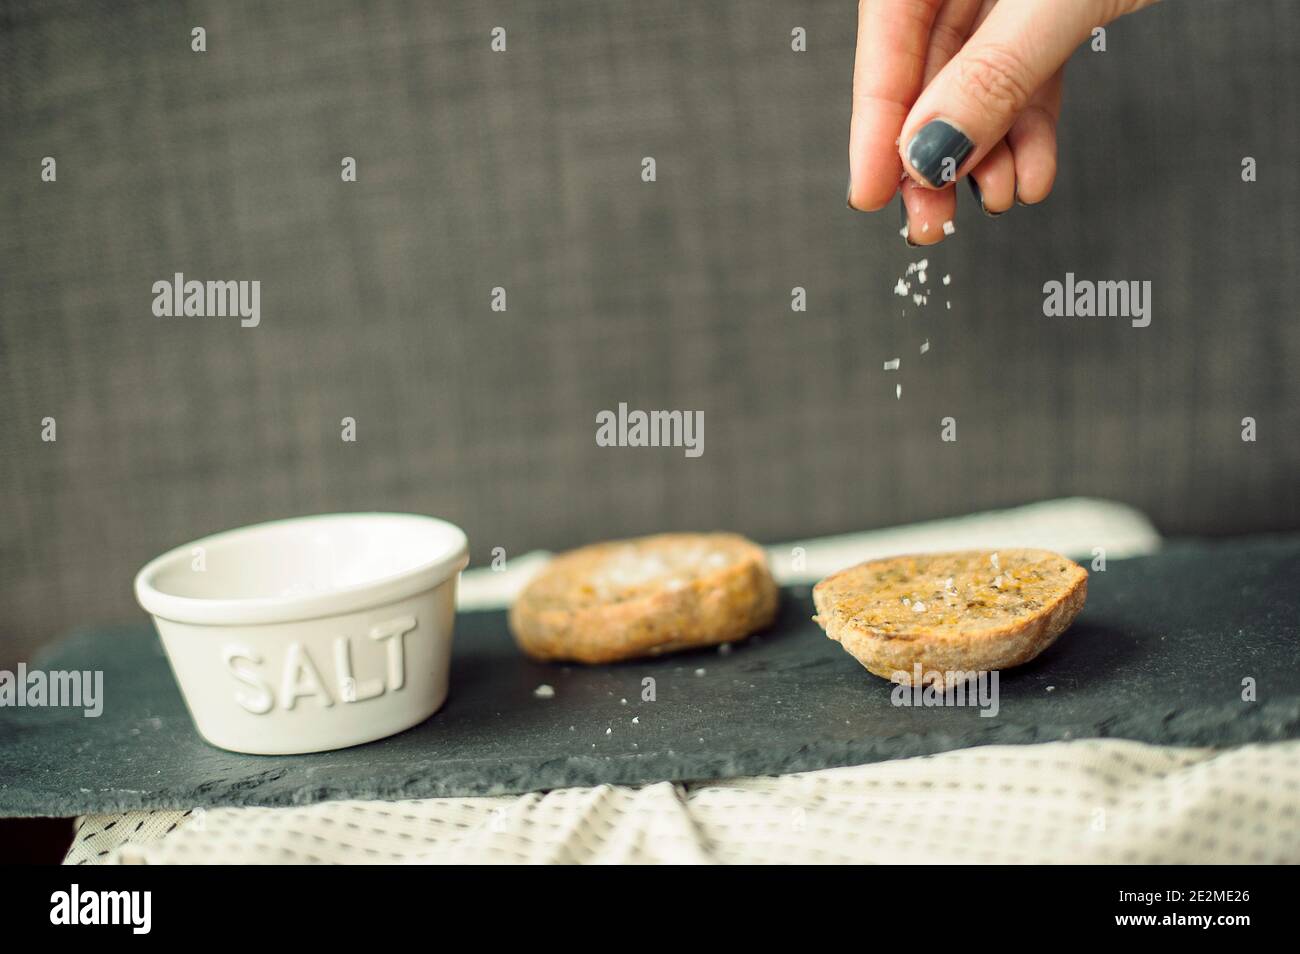 A pinch of salt. Close-up of fingers salting gluten-free homemade scones. Stock Photo